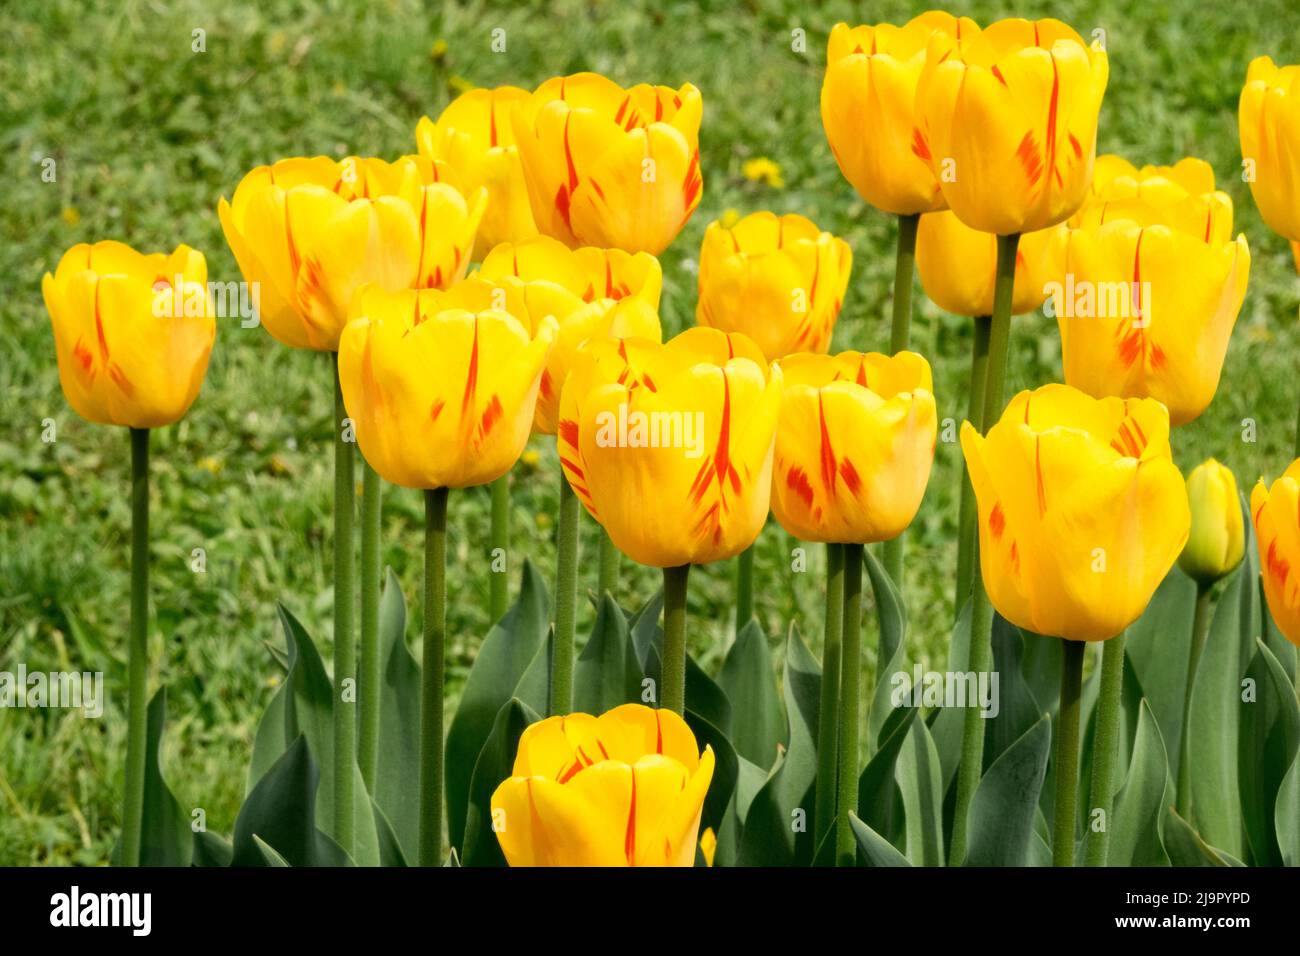 Darwin hybrid, Tulips, Group, Yellow, Flowers, Colors, Spring, Flower, Bed, Blooms Stock Photo